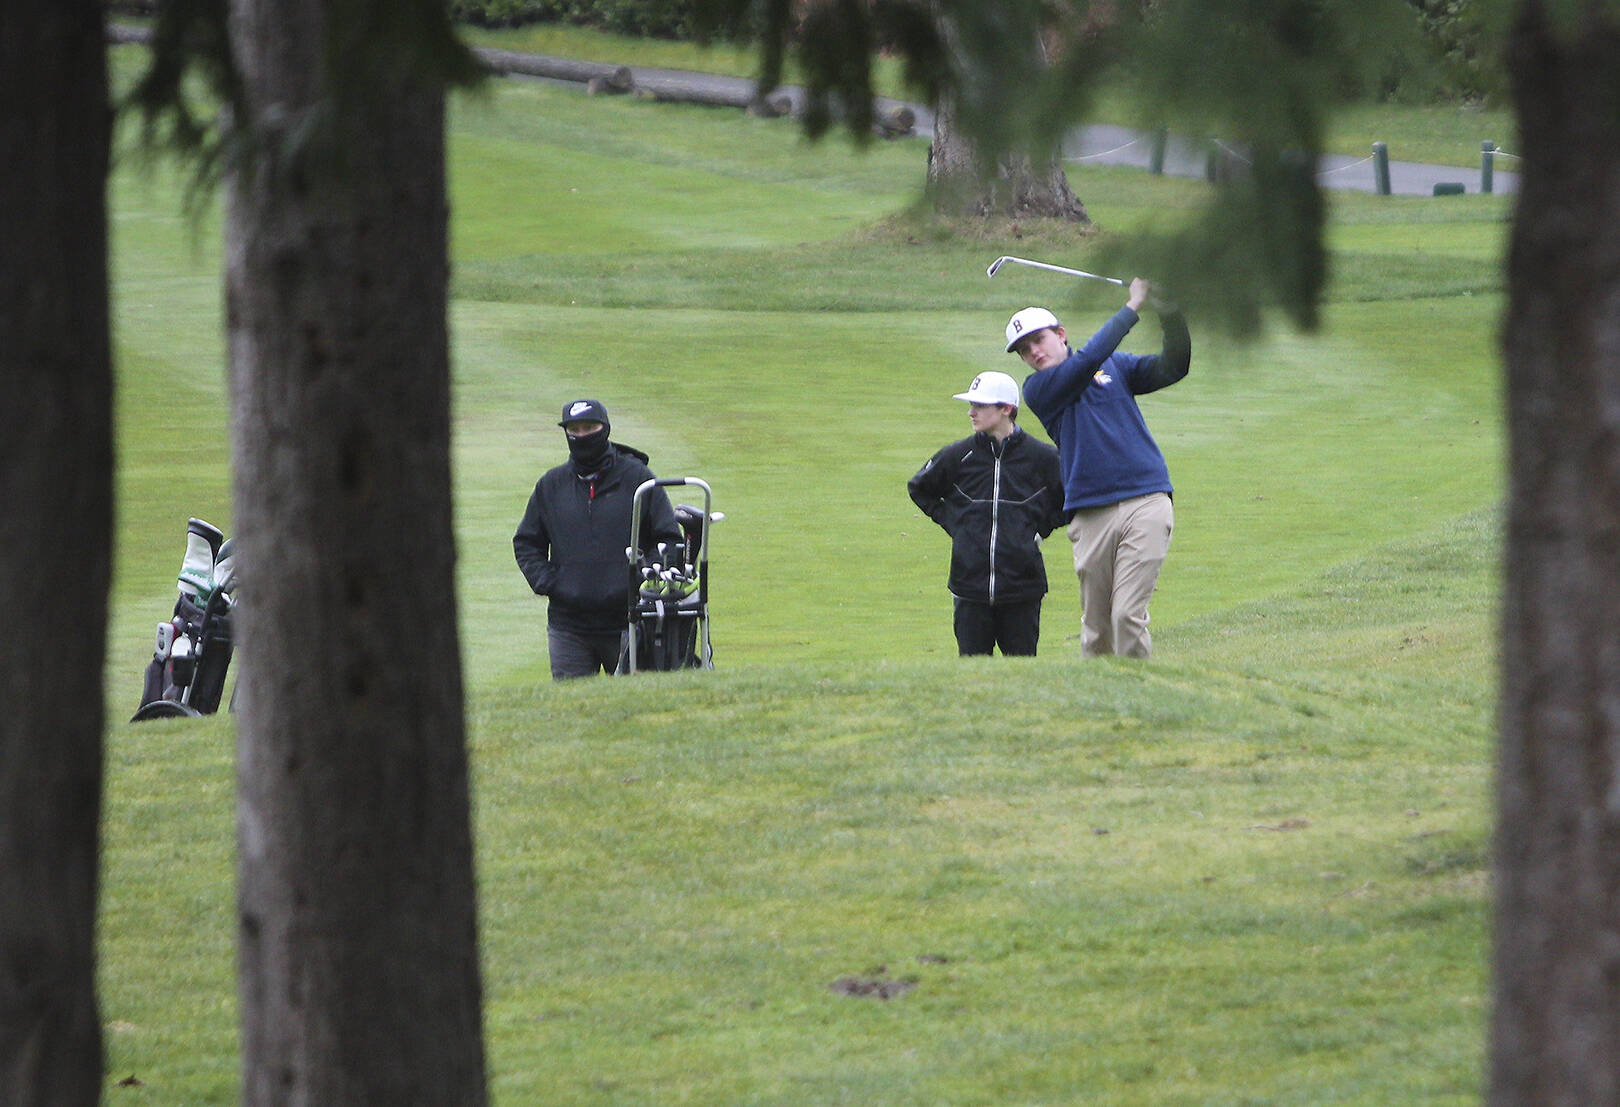 Andrew Grinter of Bainbridge hits his second shot off Hole No. 1 at White Horse Golf Club against Kingston.